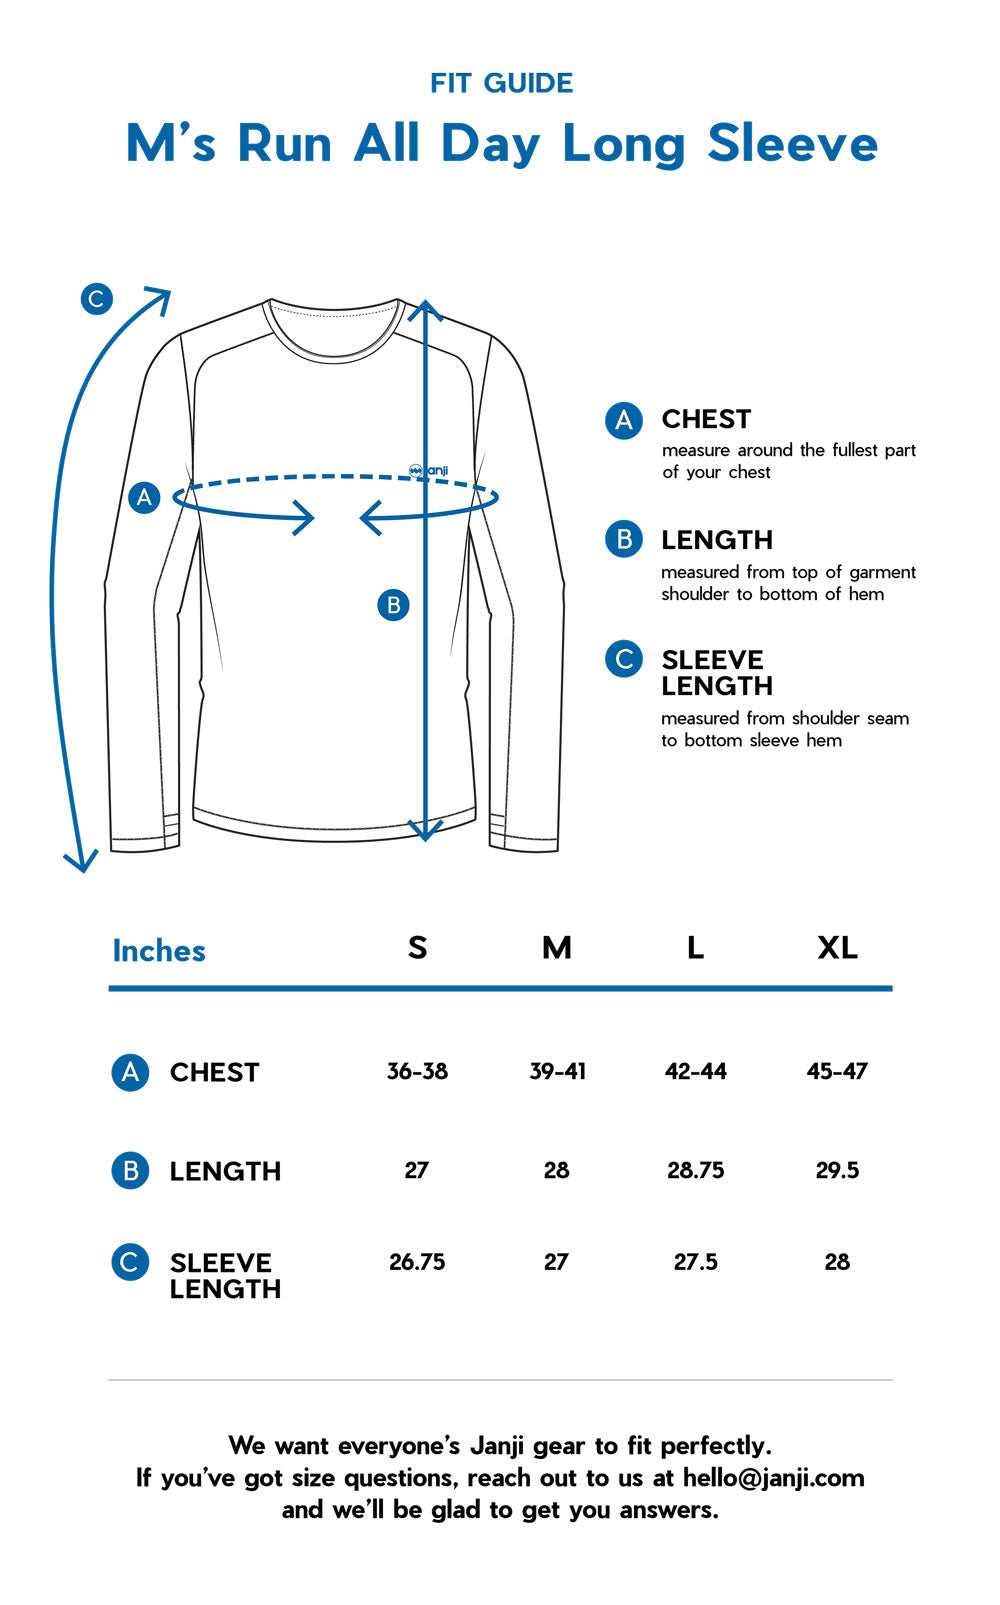 M's Run All Day Tech Long Sleeve size guide